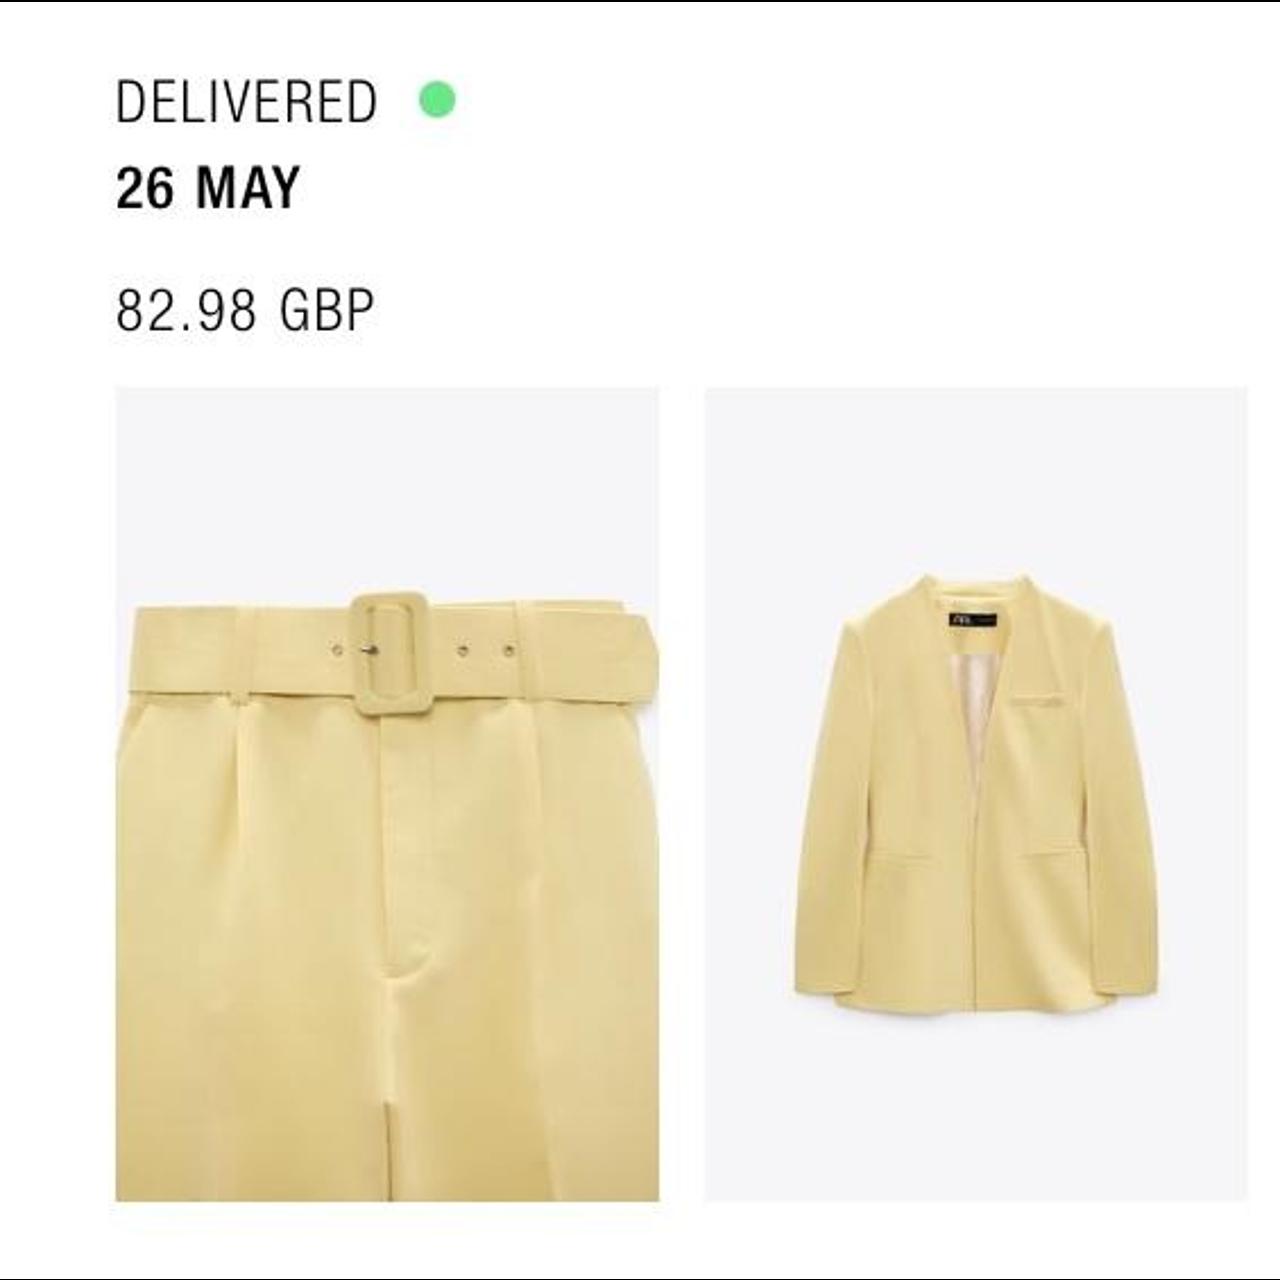 This Zara Yellow Suit Is Perfect For Spring - Fly Fierce Fab